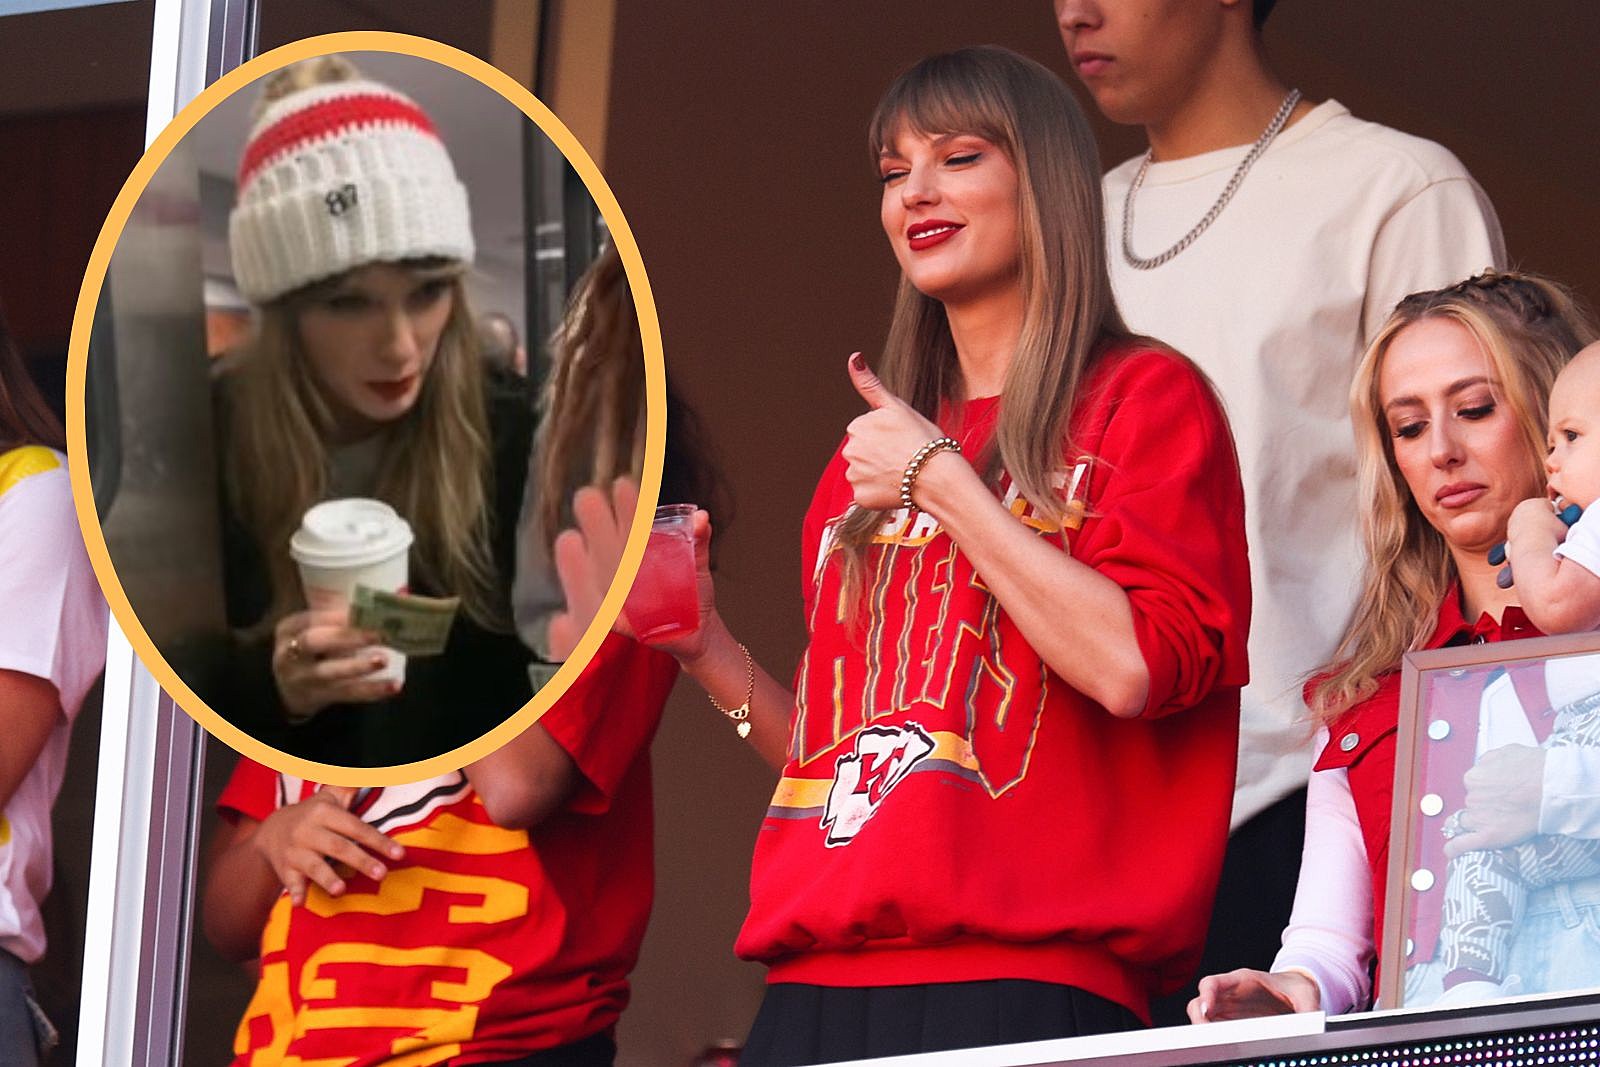 the heart hands i'm crying 😭😭😭🫶🏼🫶🏼🫶🏼🤩🤩🤩 #taylorswift #tsth